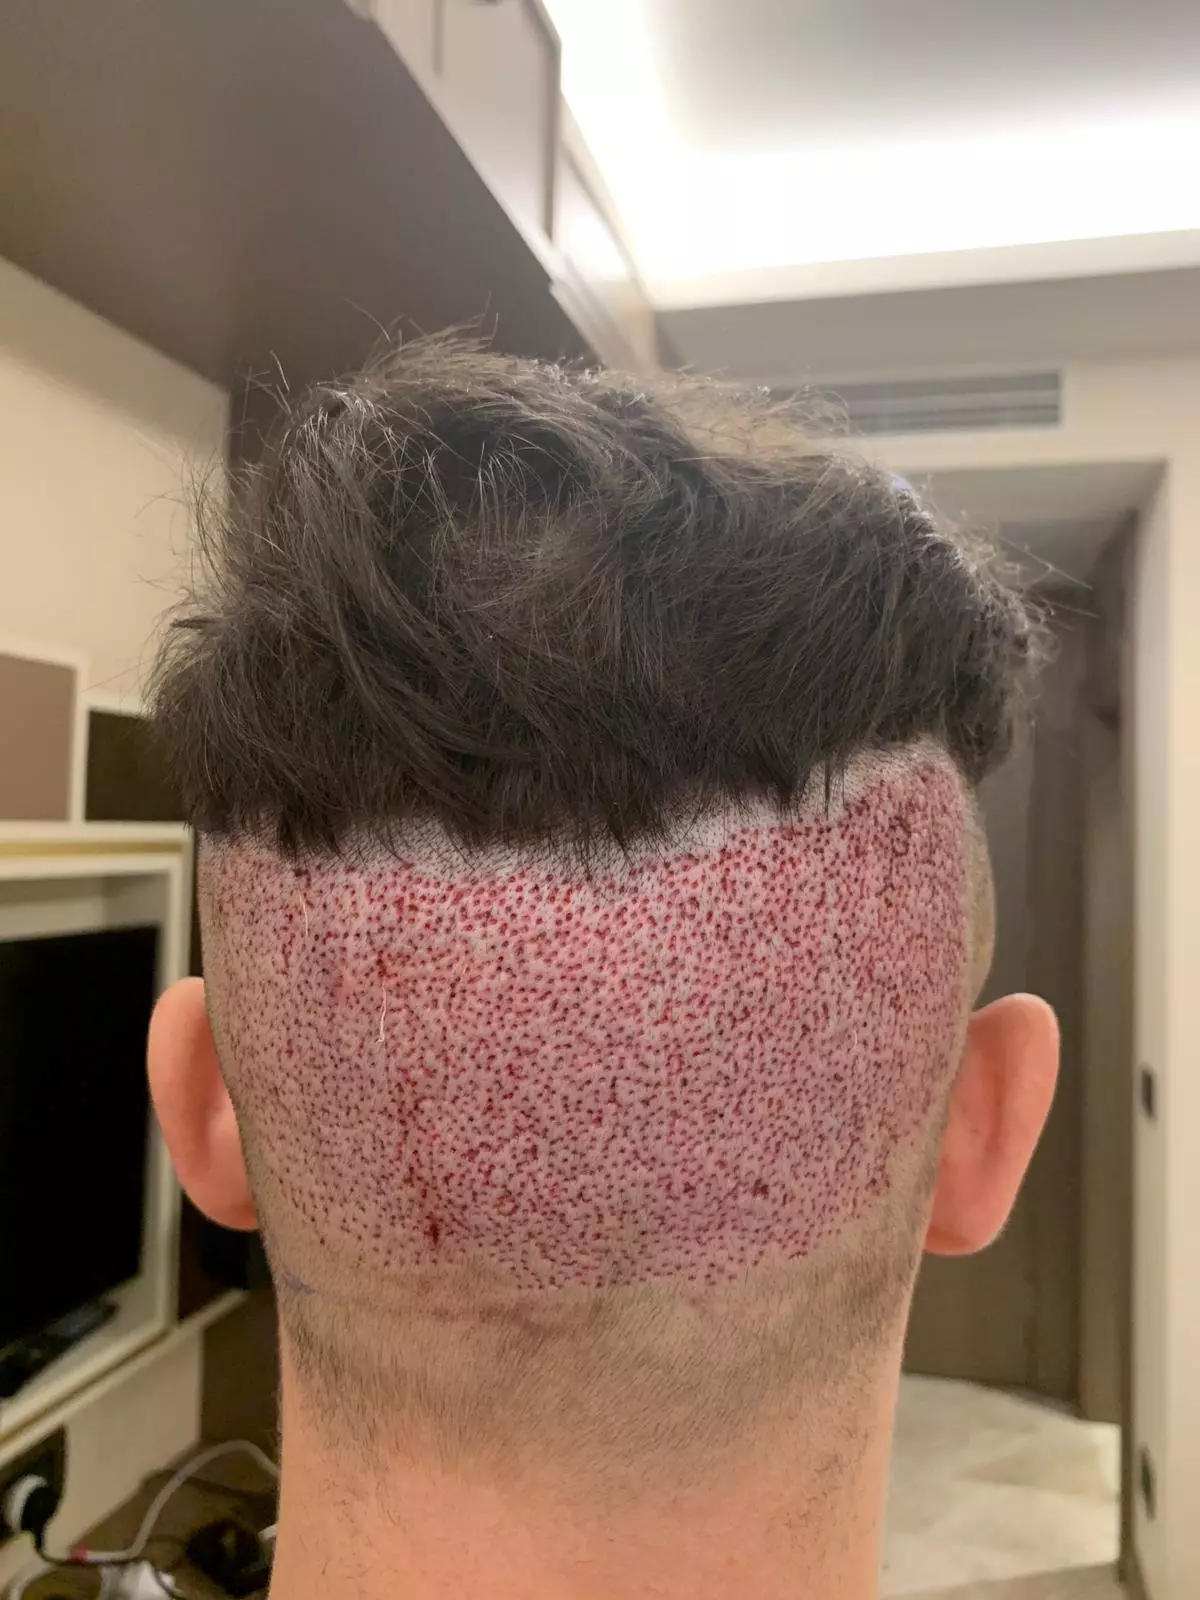 Surgeons, he says, took too much from the back, leaving him with a bald patch.